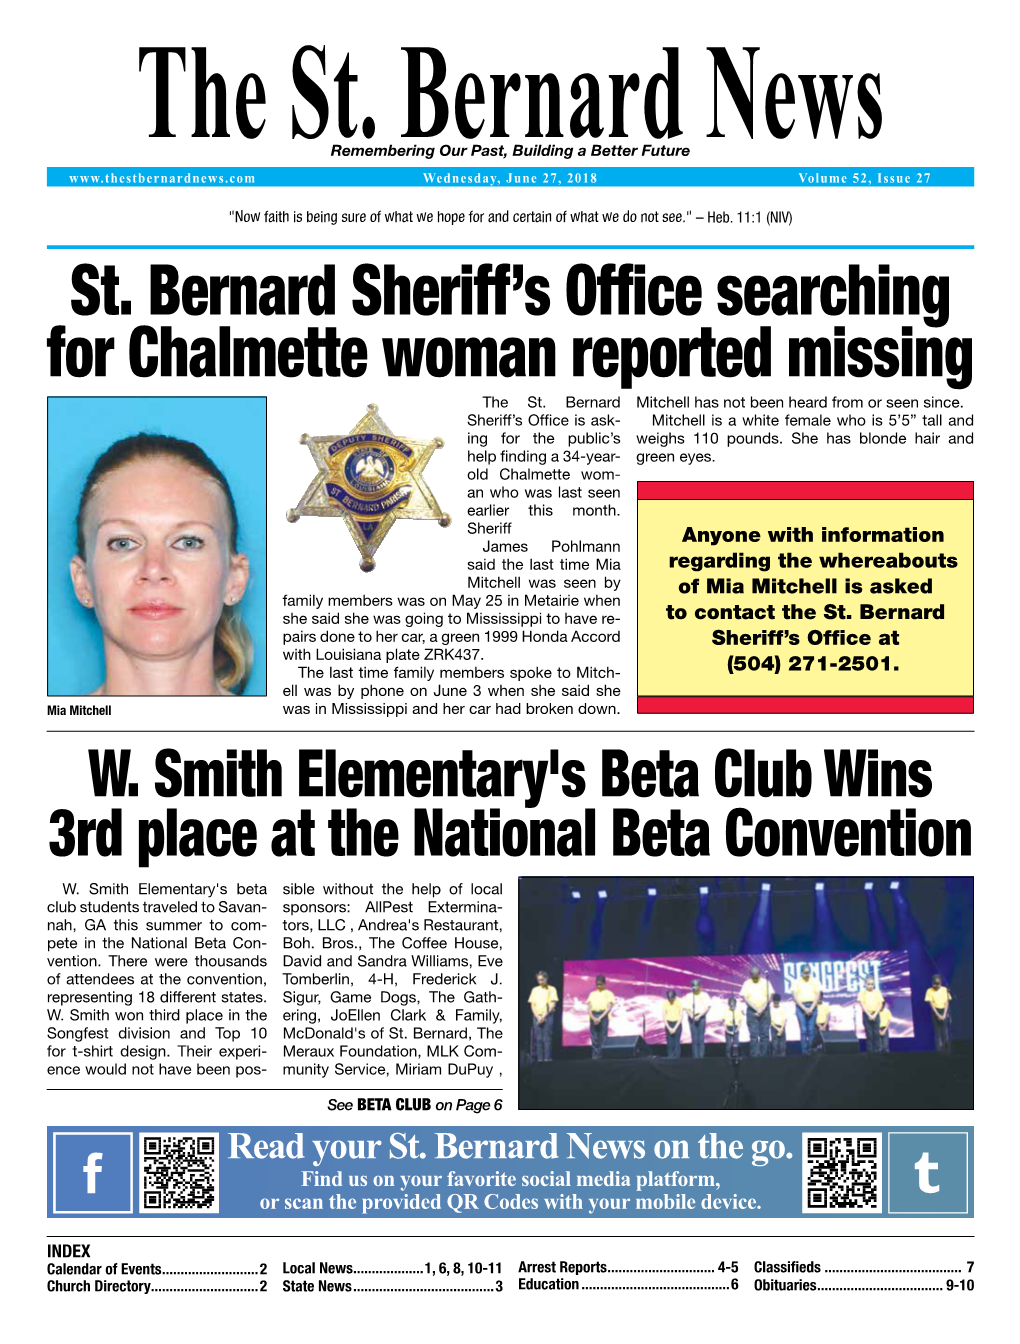 St. Bernard Sheriff's Office Searching for Chalmette Woman Reported